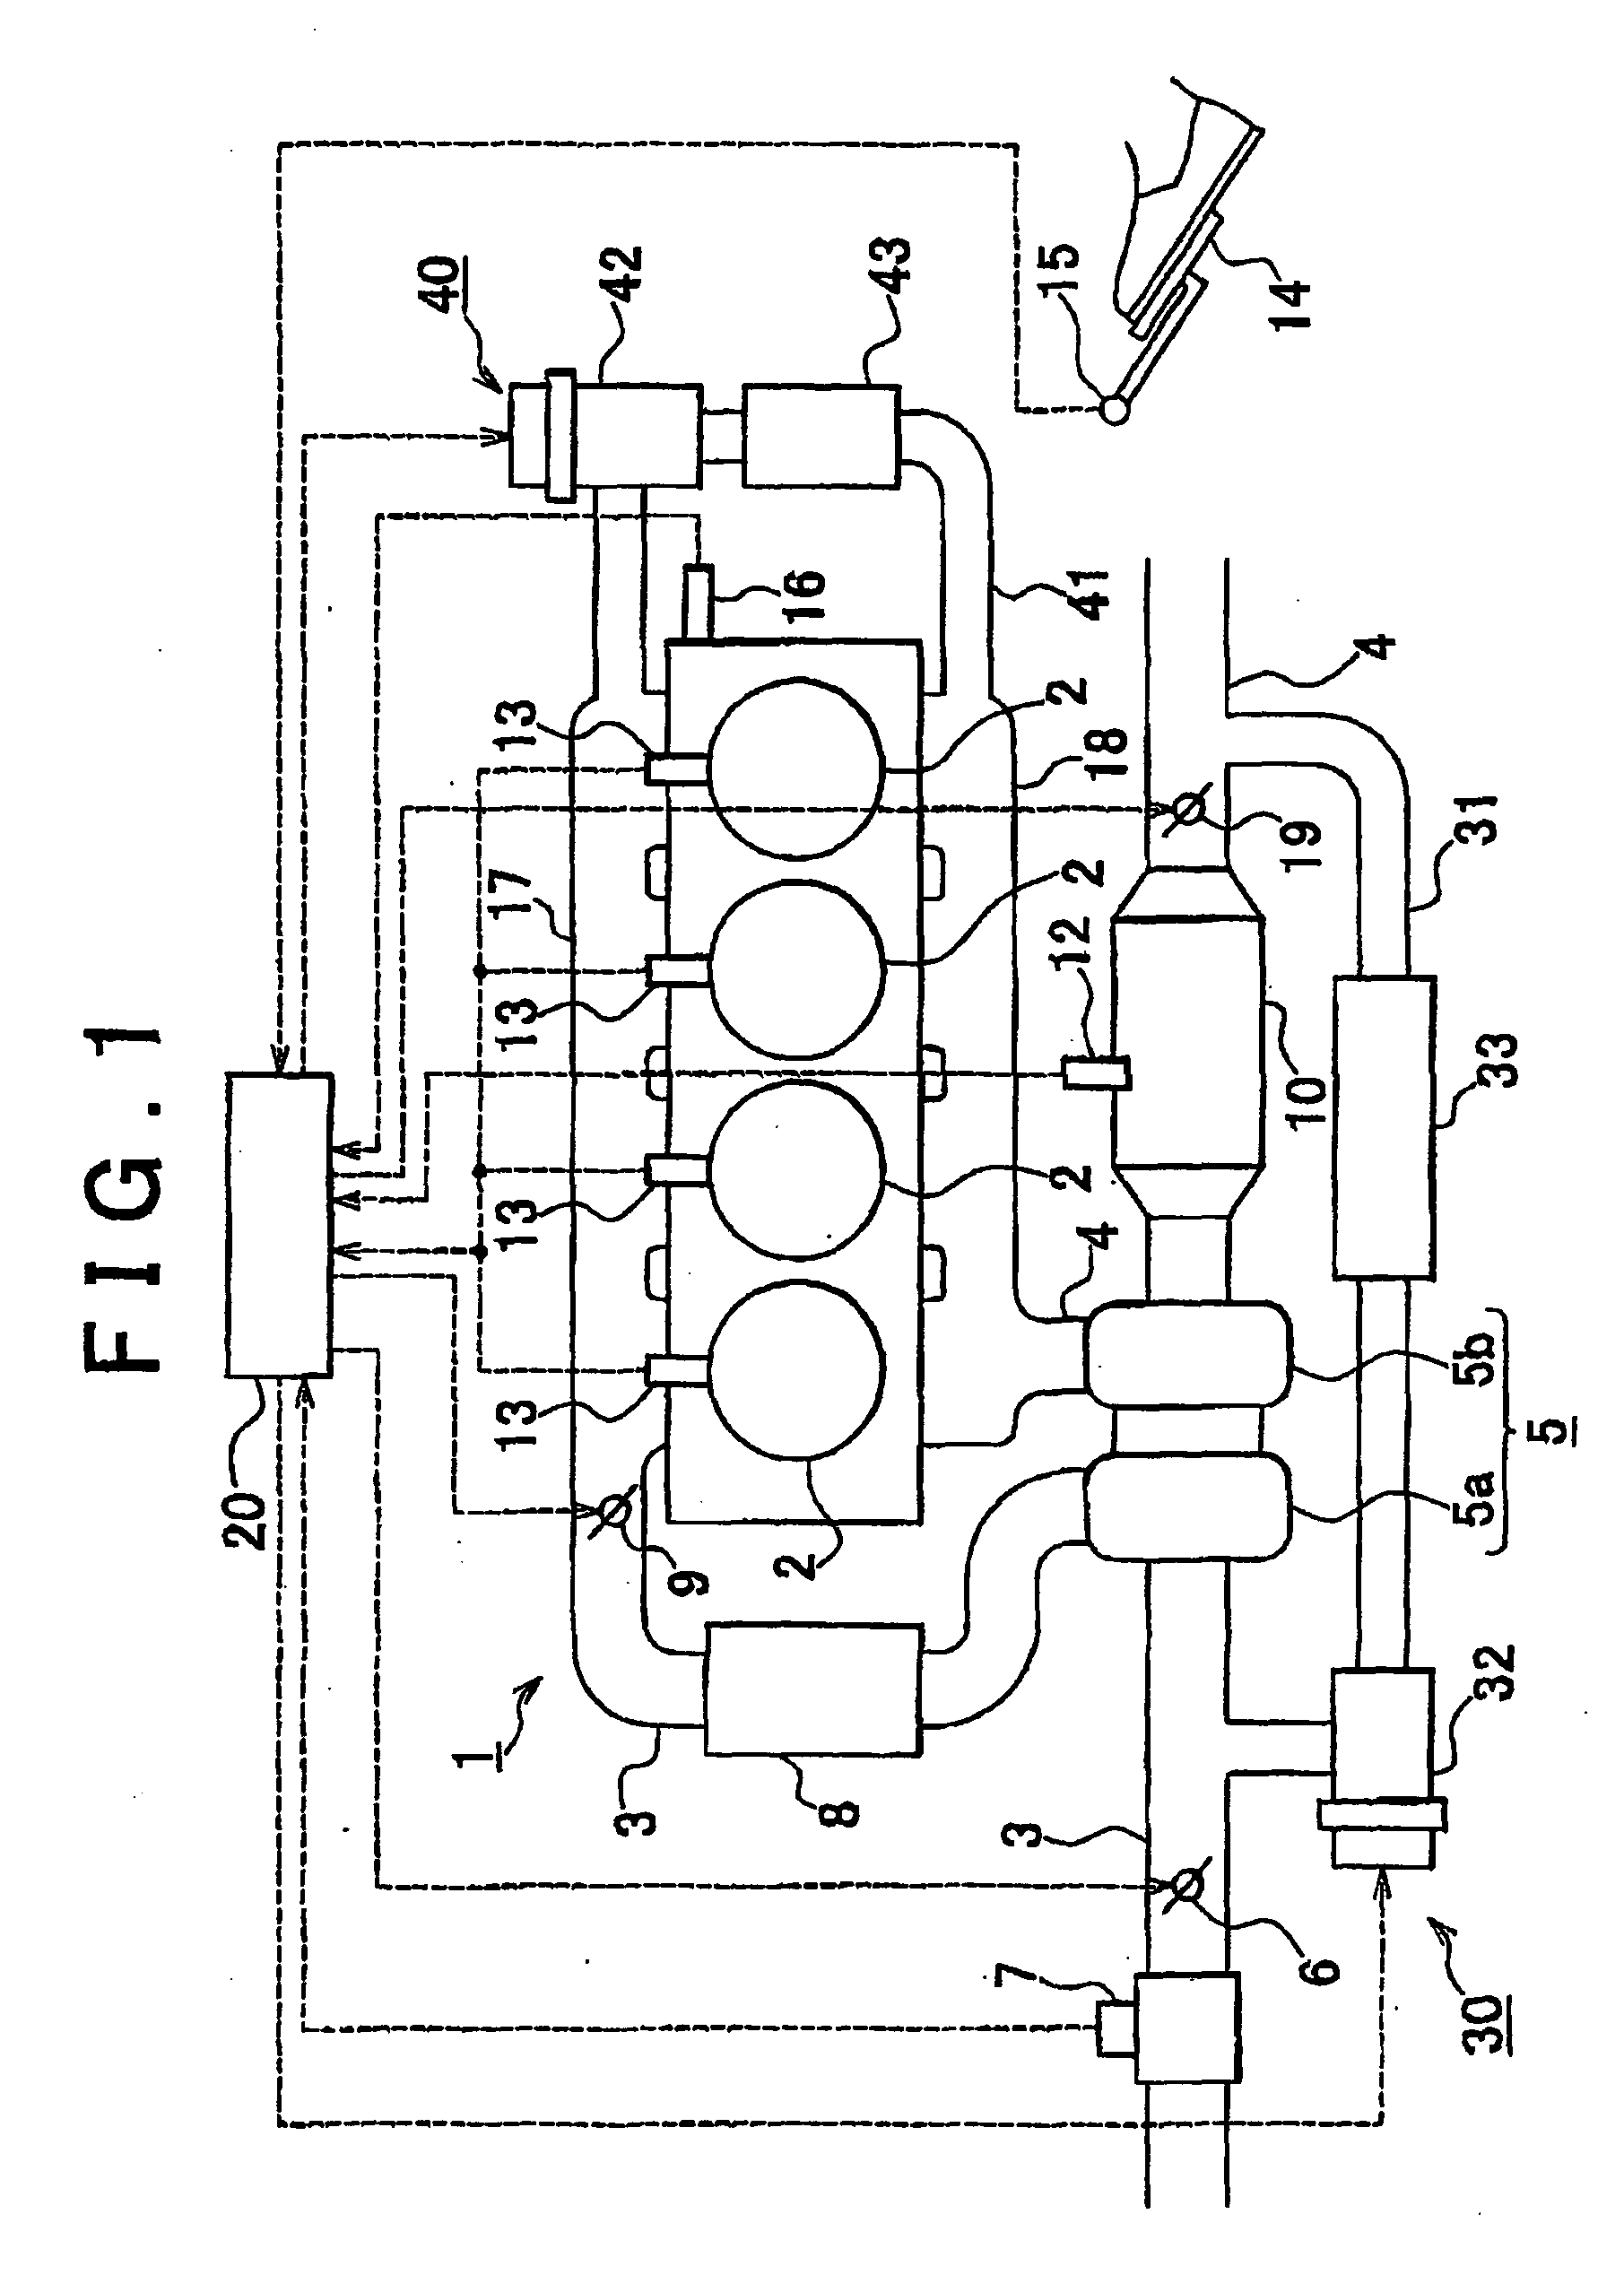 Egr system for internal combustion engine and method for controlling the same